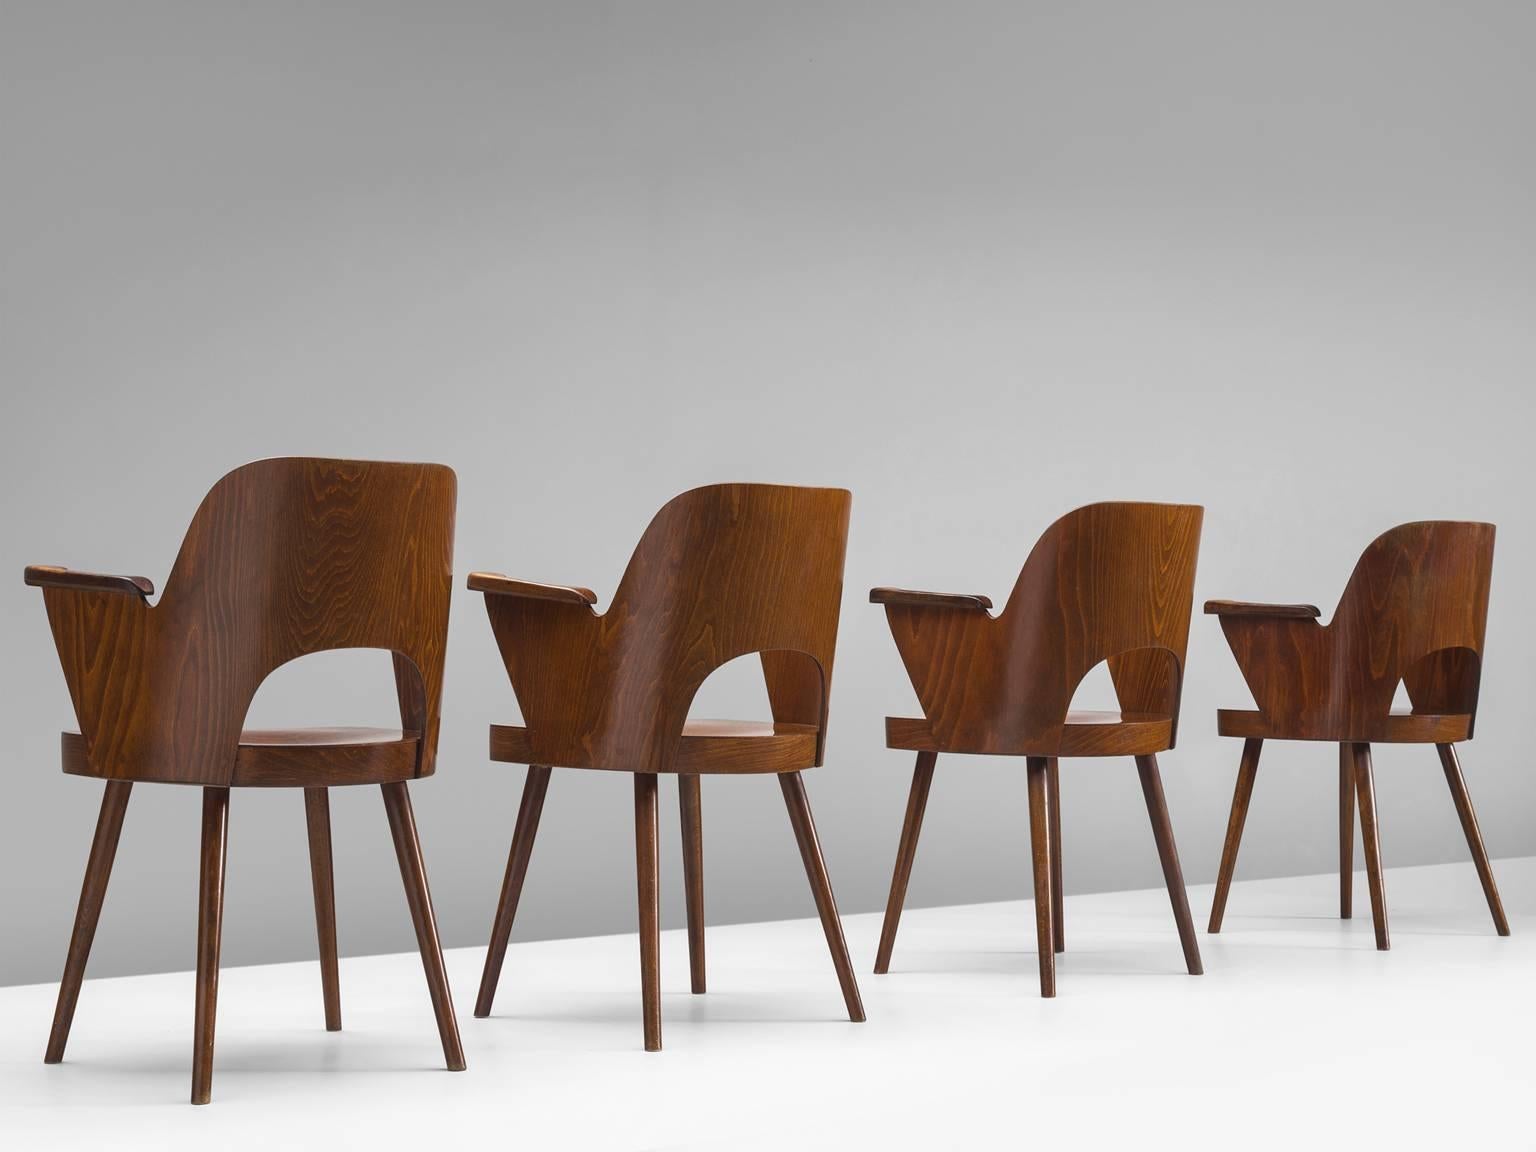 Lubomír Hofmann for TON, Czech Republic, 1955.

Set of four bended plywood armchairs in beech. These chairs were designed by Lubomír Hofmann for the famous bentwood manufacturer TON. These chairs show nice curves and elegant lines. While the dark